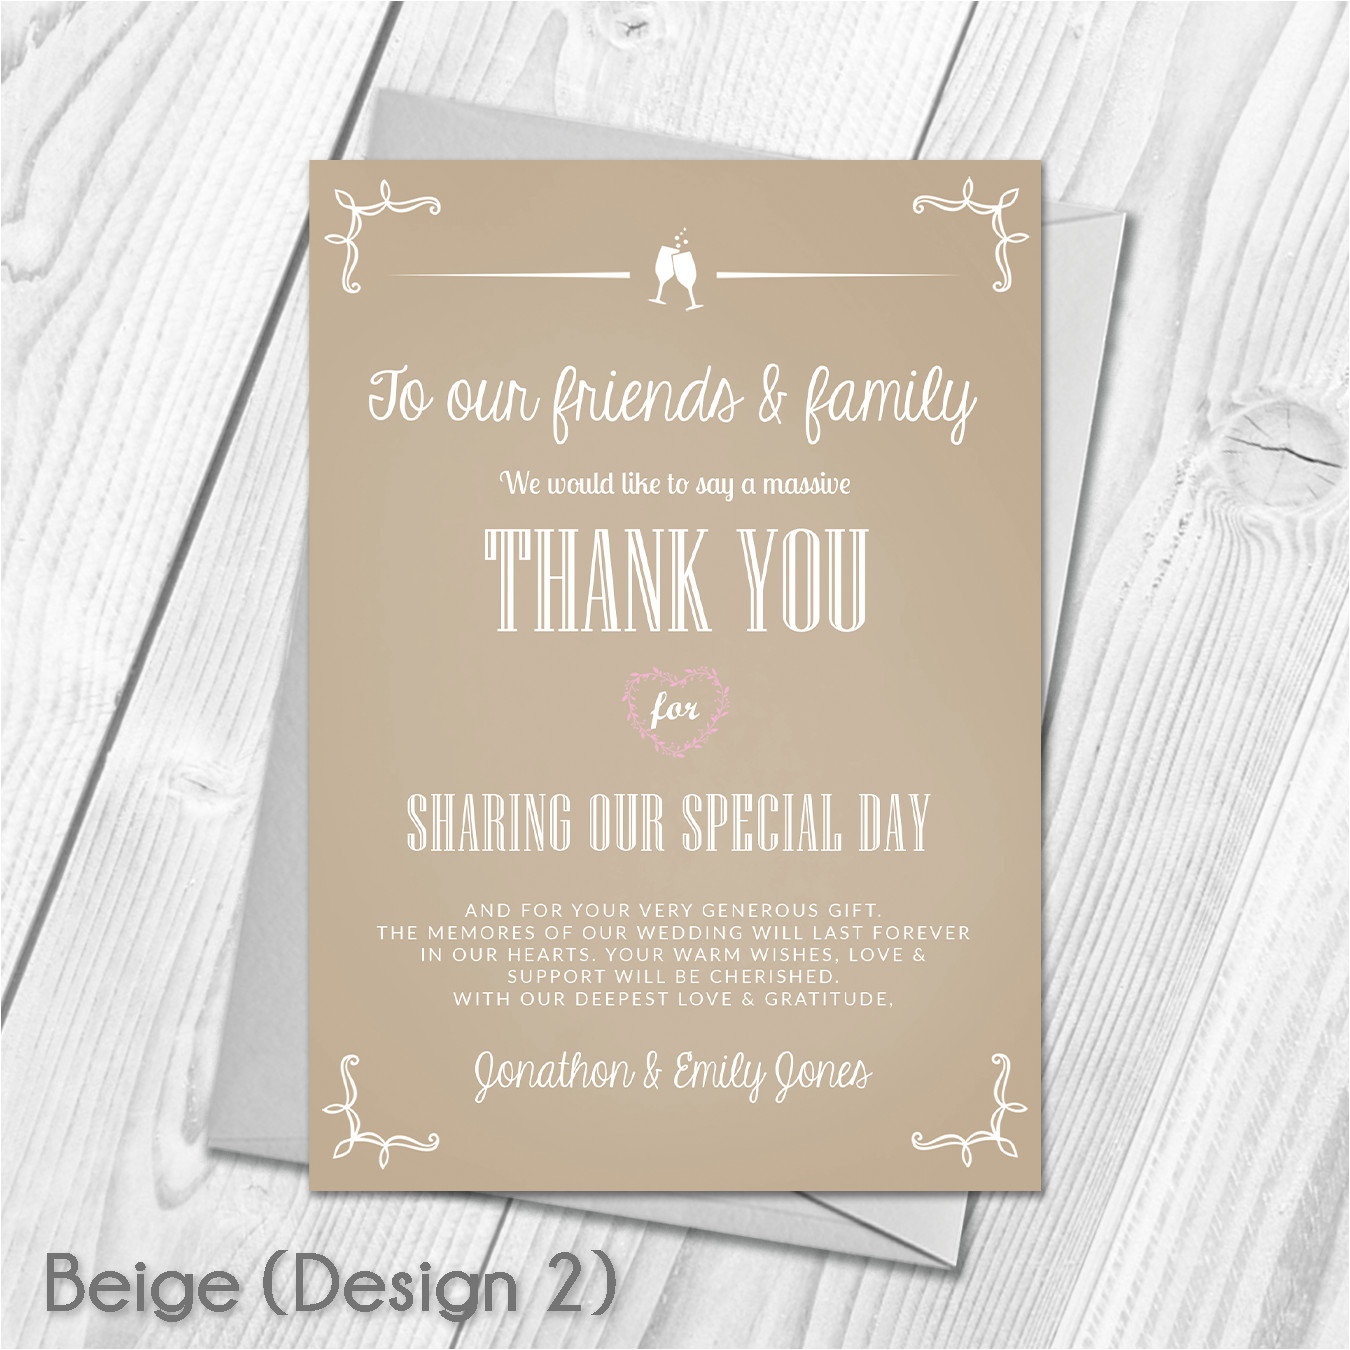 What to Say In A Thank You Card Wedding Premium Personalised Wedding Thank You Cards Wedding Guest